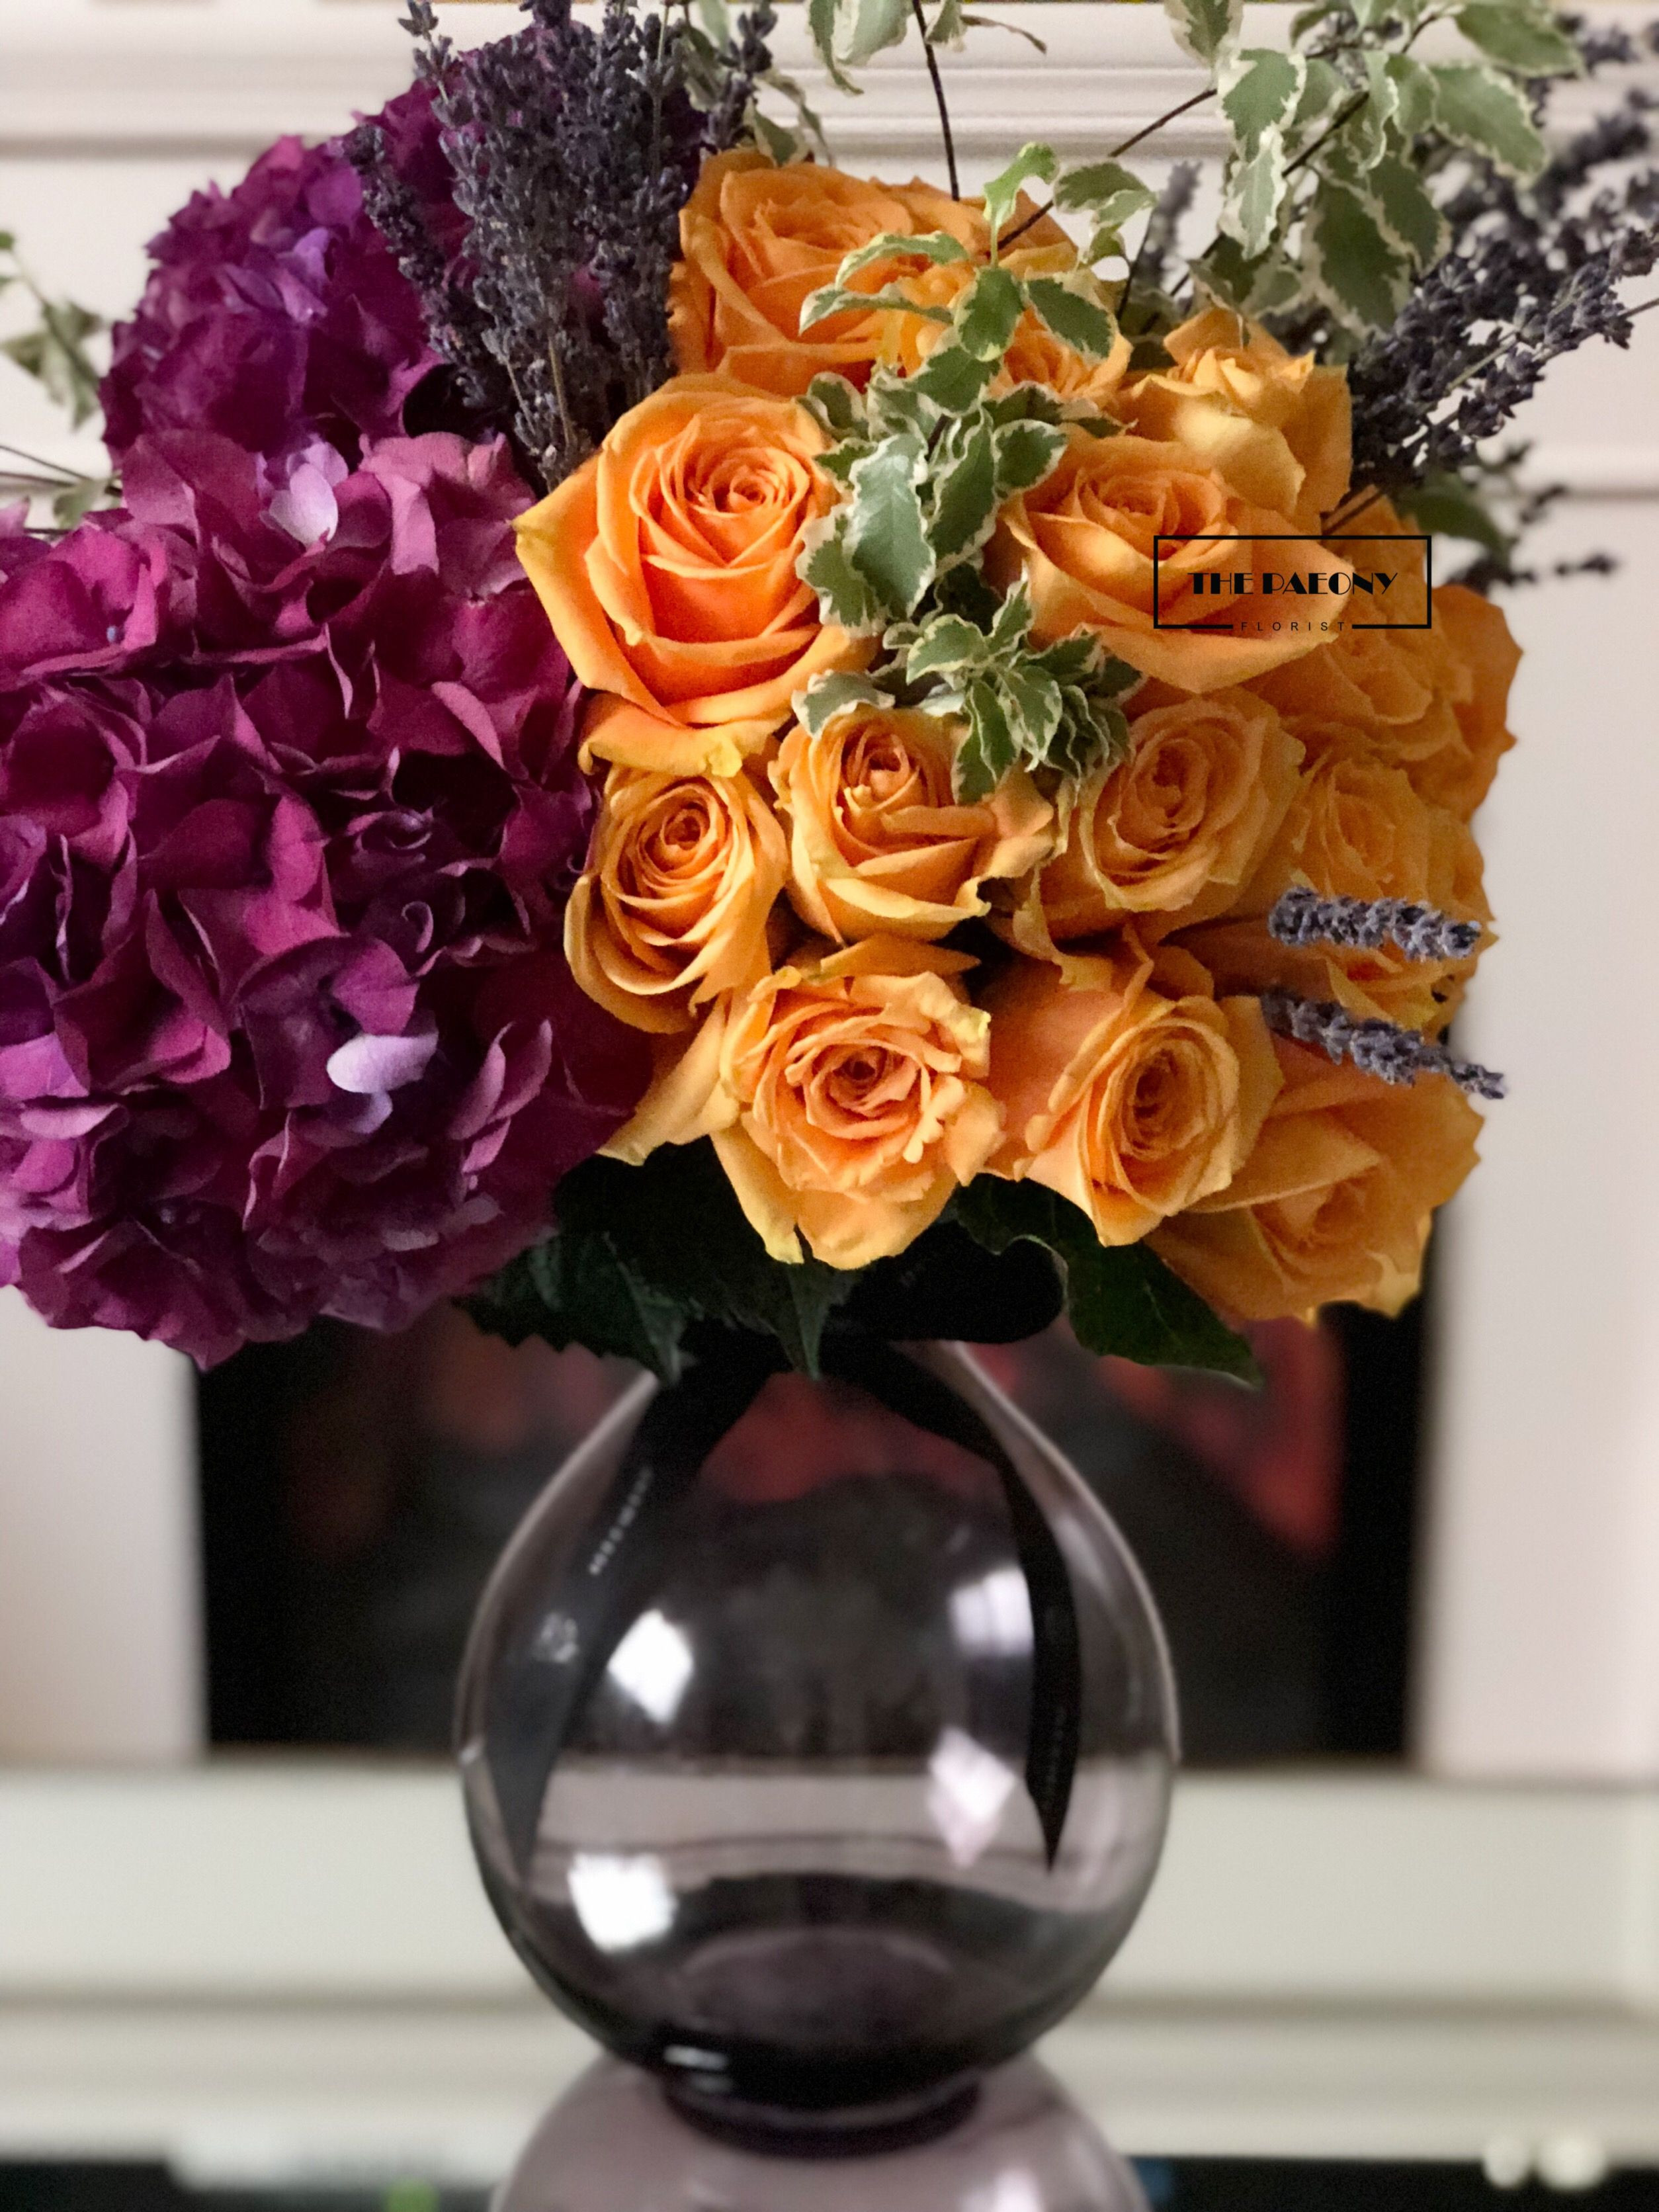 29 Amazing Single Hydrangea In Vase 2024 free download single hydrangea in vase of pin by the paeony on my floral designs pinterest purple vase with regard to pin by the paeony on my floral designs pinterest purple vase purple hydrangeas and ora